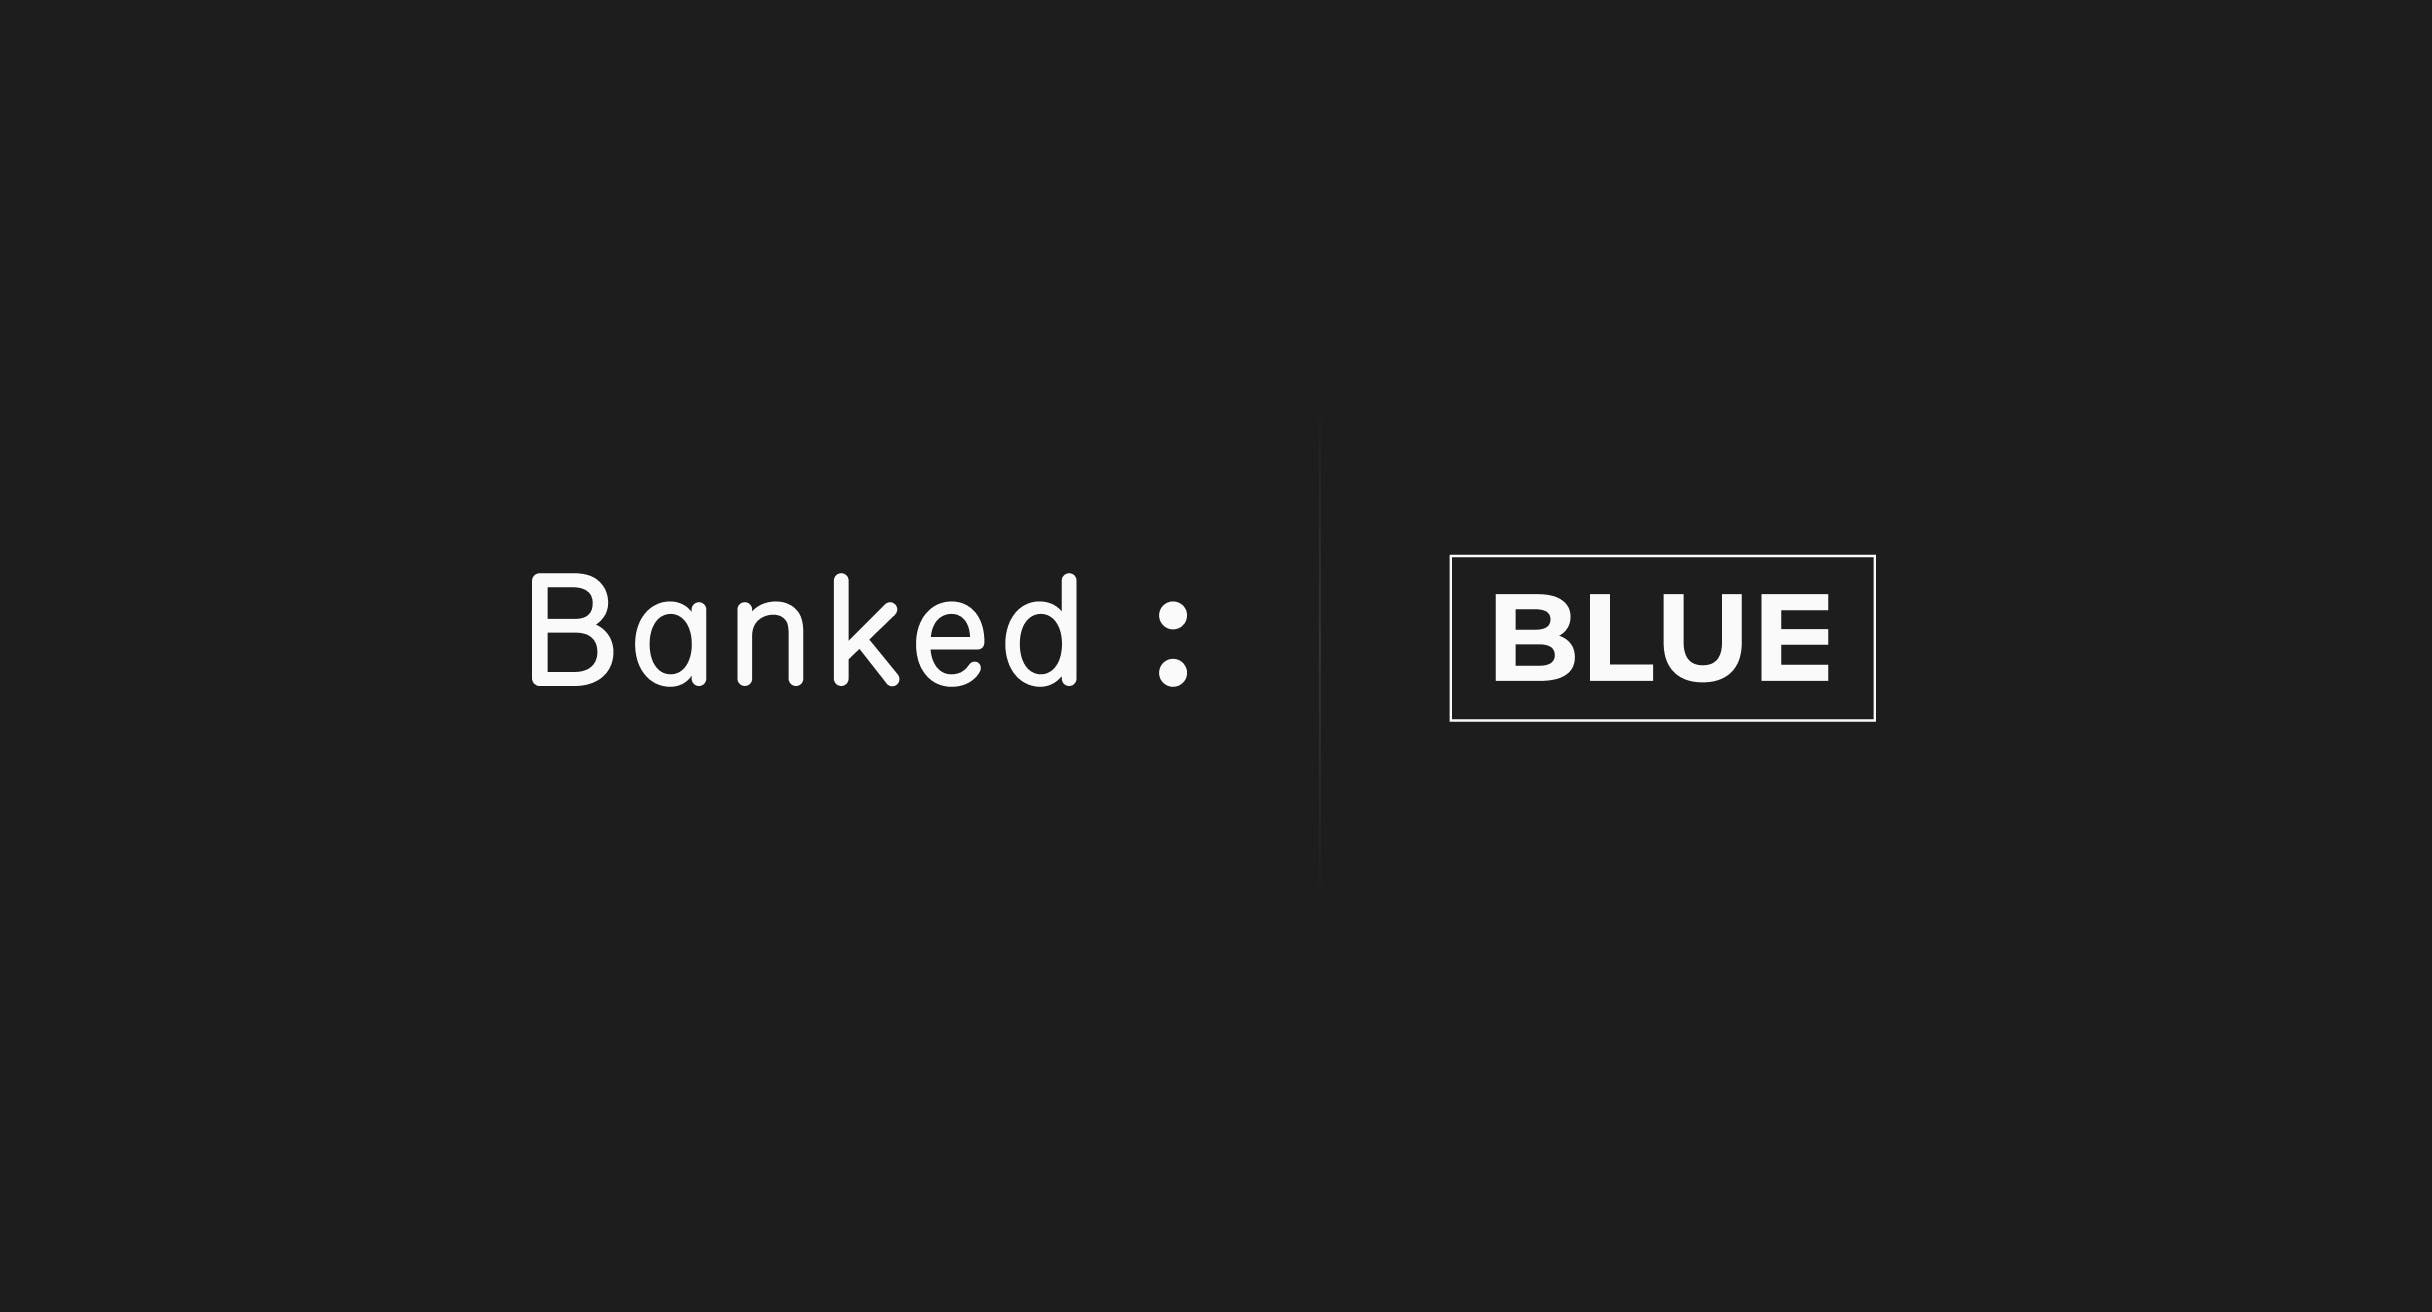 Bankeds latest partnership with Blue revolutionises customer payments
